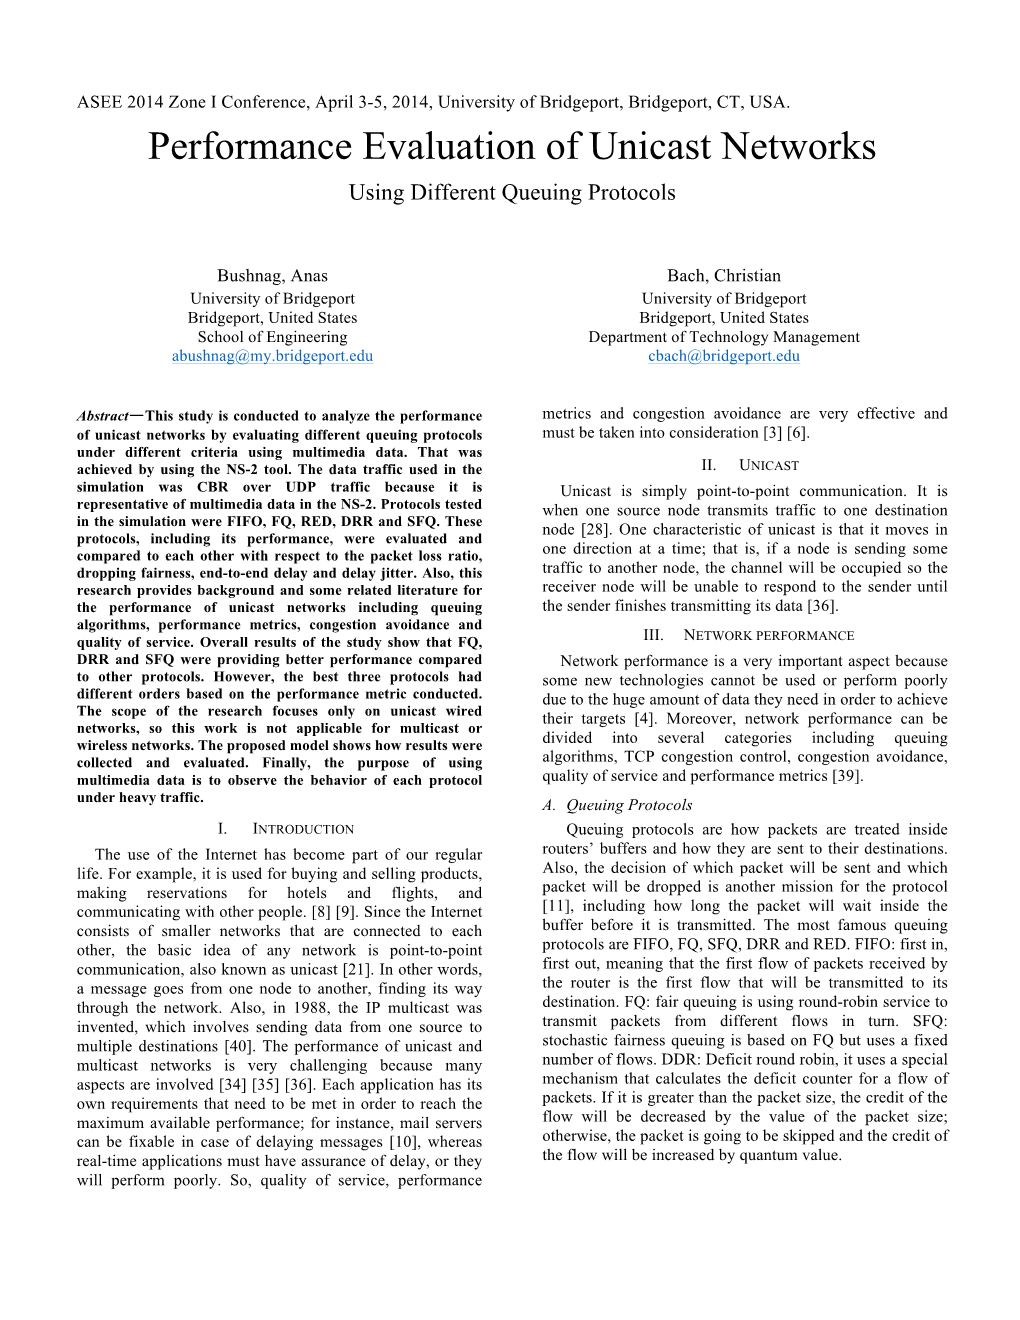 Performance Evaluation of Unicast Networks Using Different Queuing Protocols